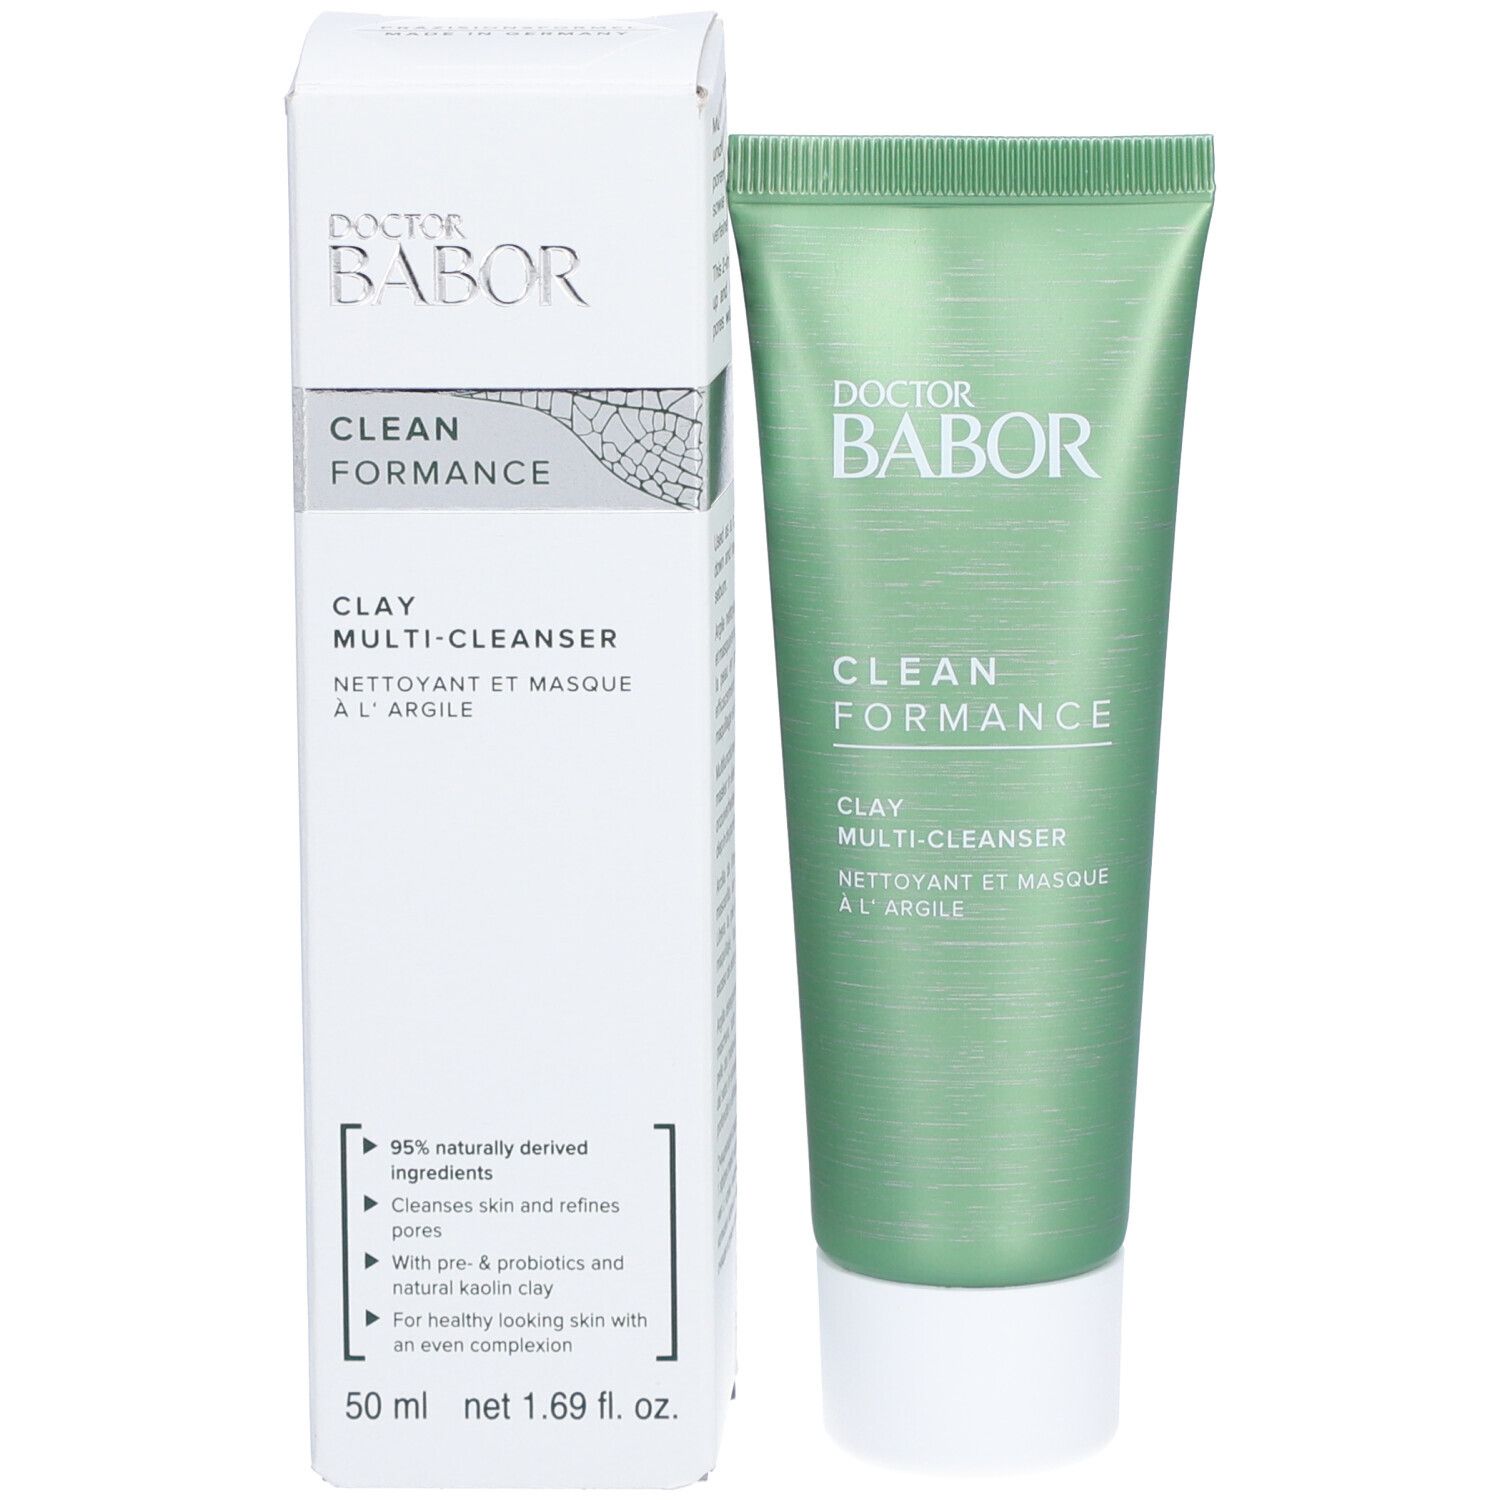 Babor Cleanformance Clay Multi-Cleanser